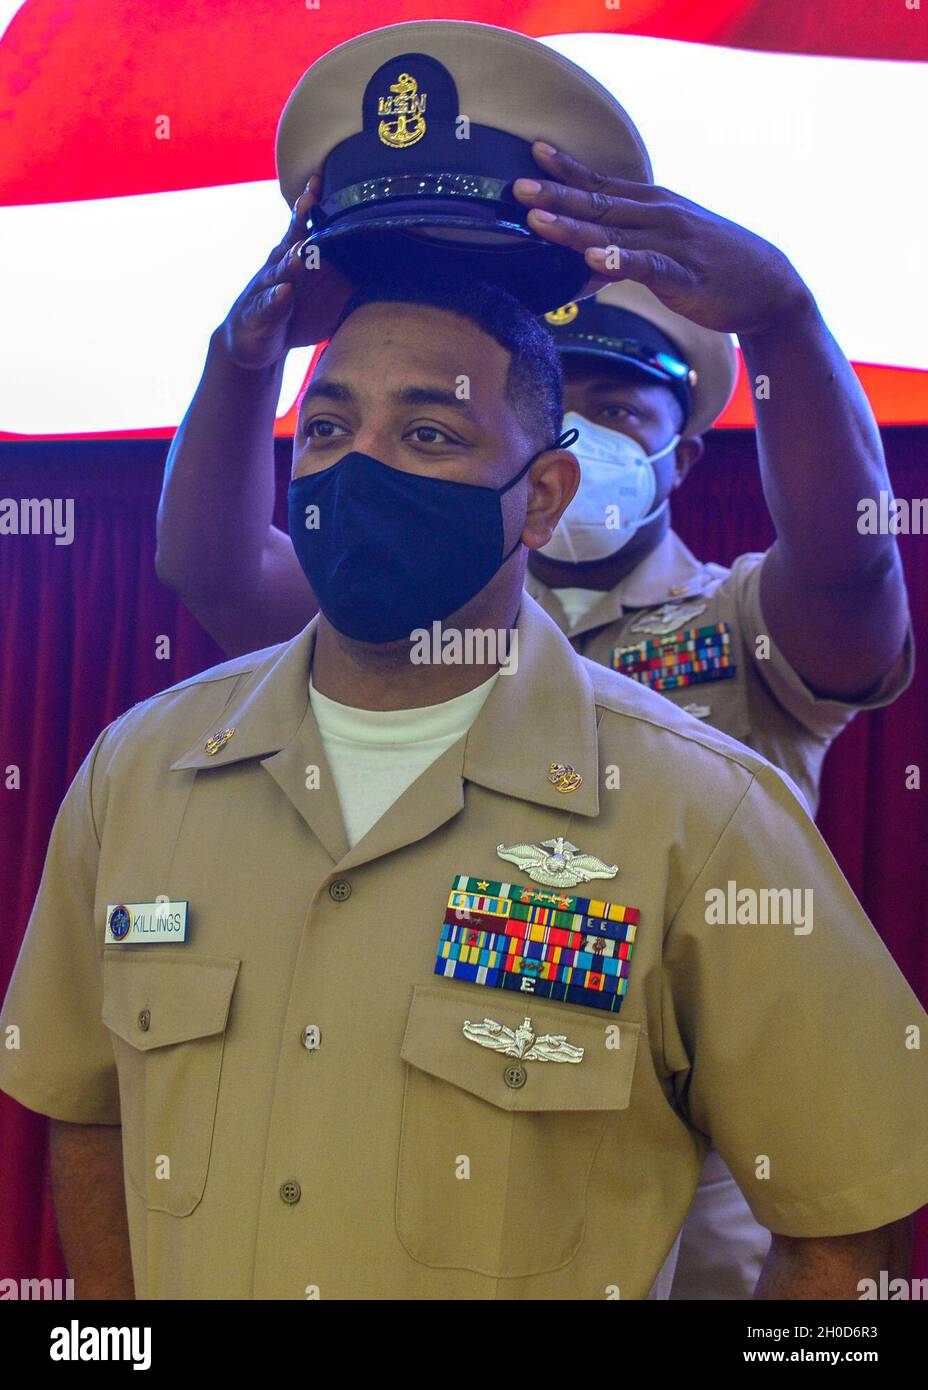 210129-N-NH199-1180  SAN DIEGO (Jan. 29, 2021) Chief Hospital Corpsman Anthony Killings receives his combination cover from his sponsor during a chief petty officer pinning ceremony on board Navy Medicine & Readiness Training Center San Diego (NMRTC) Jan. 29. Due to the COVID-19 pandemic, the ceremony was livestreamed via video teleconference (VTC) and Facebook Live allowing family, friends and staff to participate while adhering to social distancing guidelines set forth from the Centers for Disease Control (CDC). The COVID-19 pandemic has changed the ways of how to conduct business and NMRTC Stock Photo